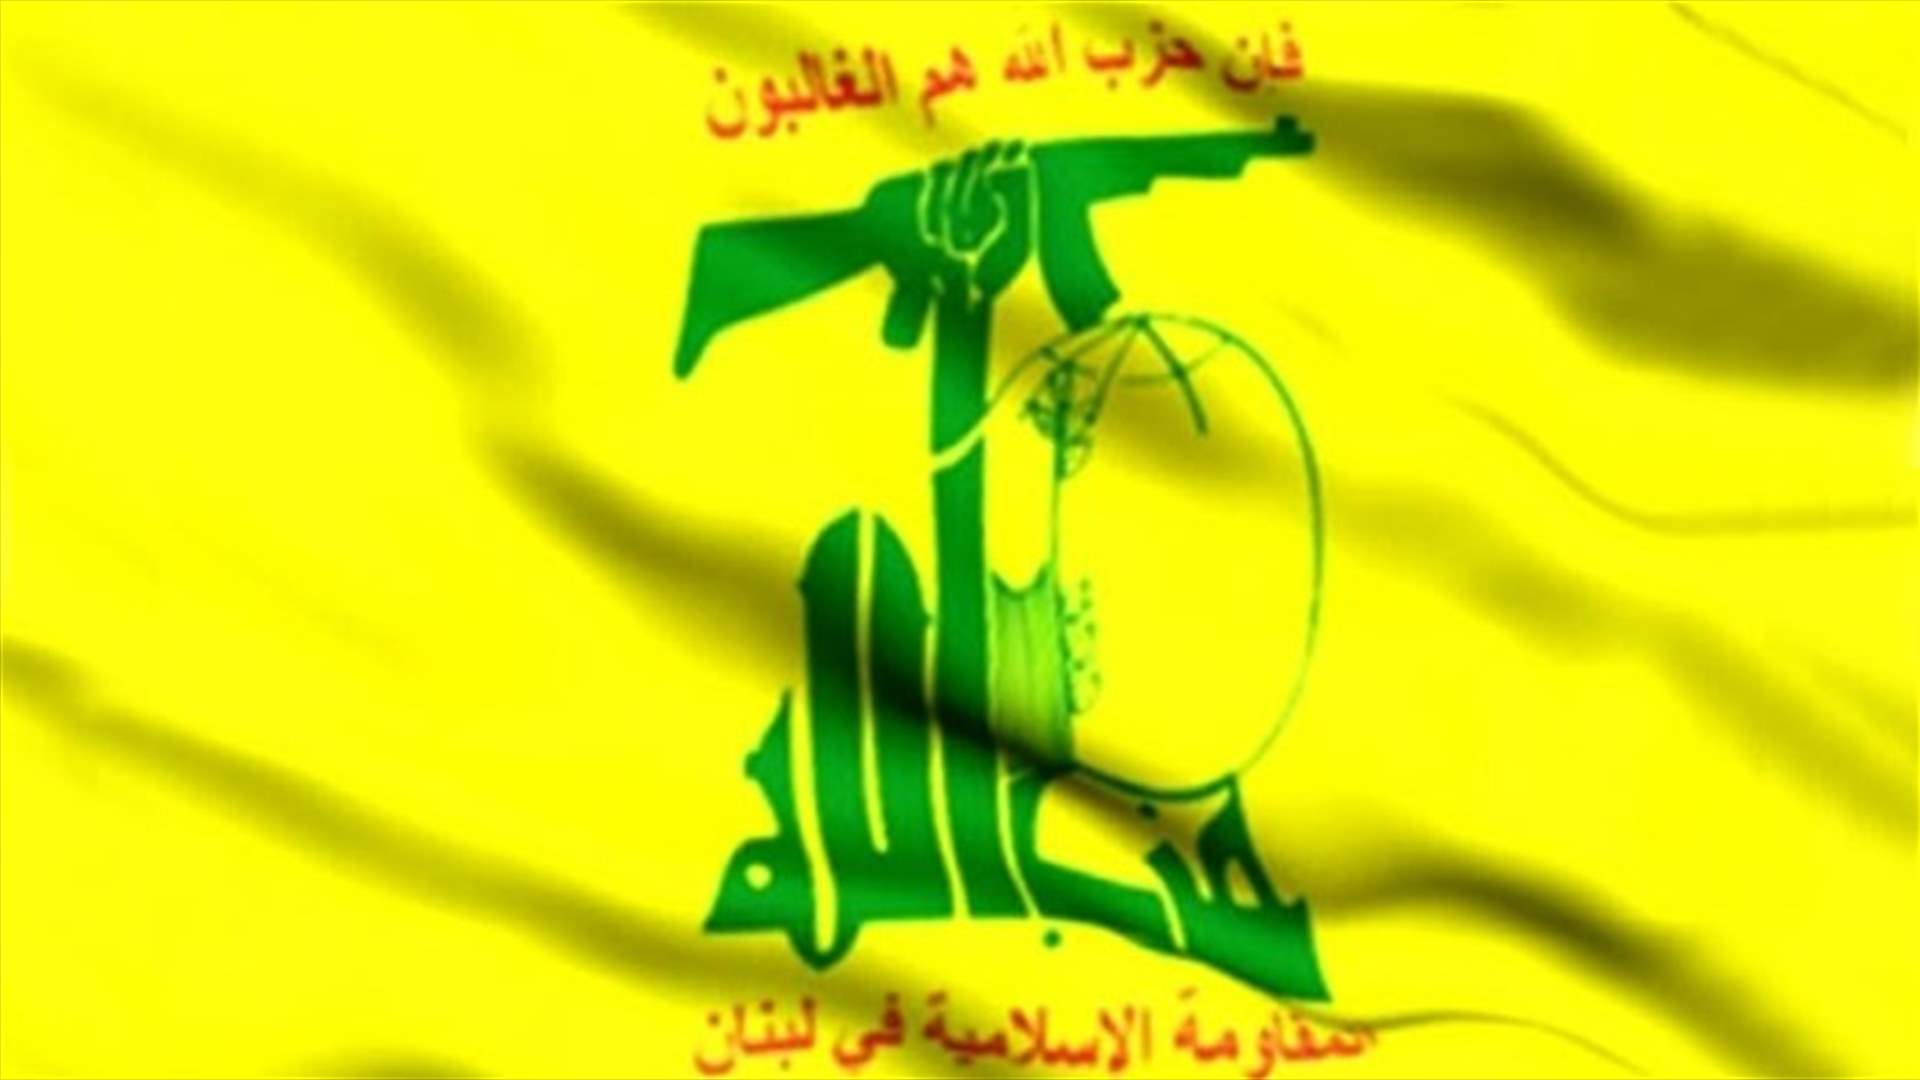 Hezbollah condemns attack on a shrine in Iraq